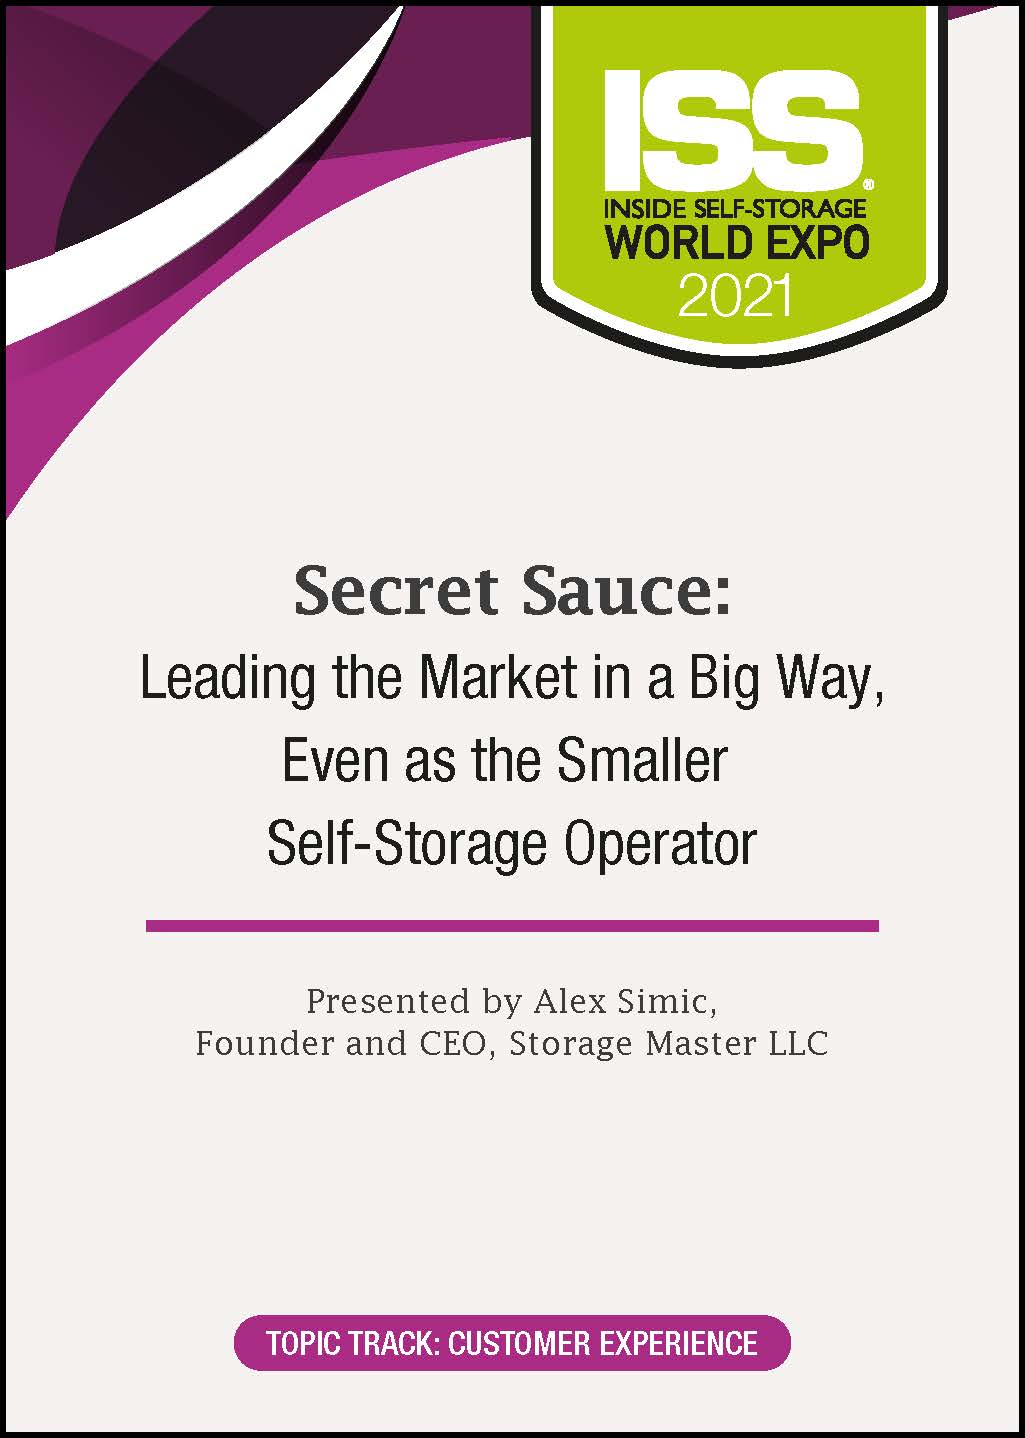 Secret Sauce: Leading the Market in a Big Way, Even as the Smaller Self-Storage Operator